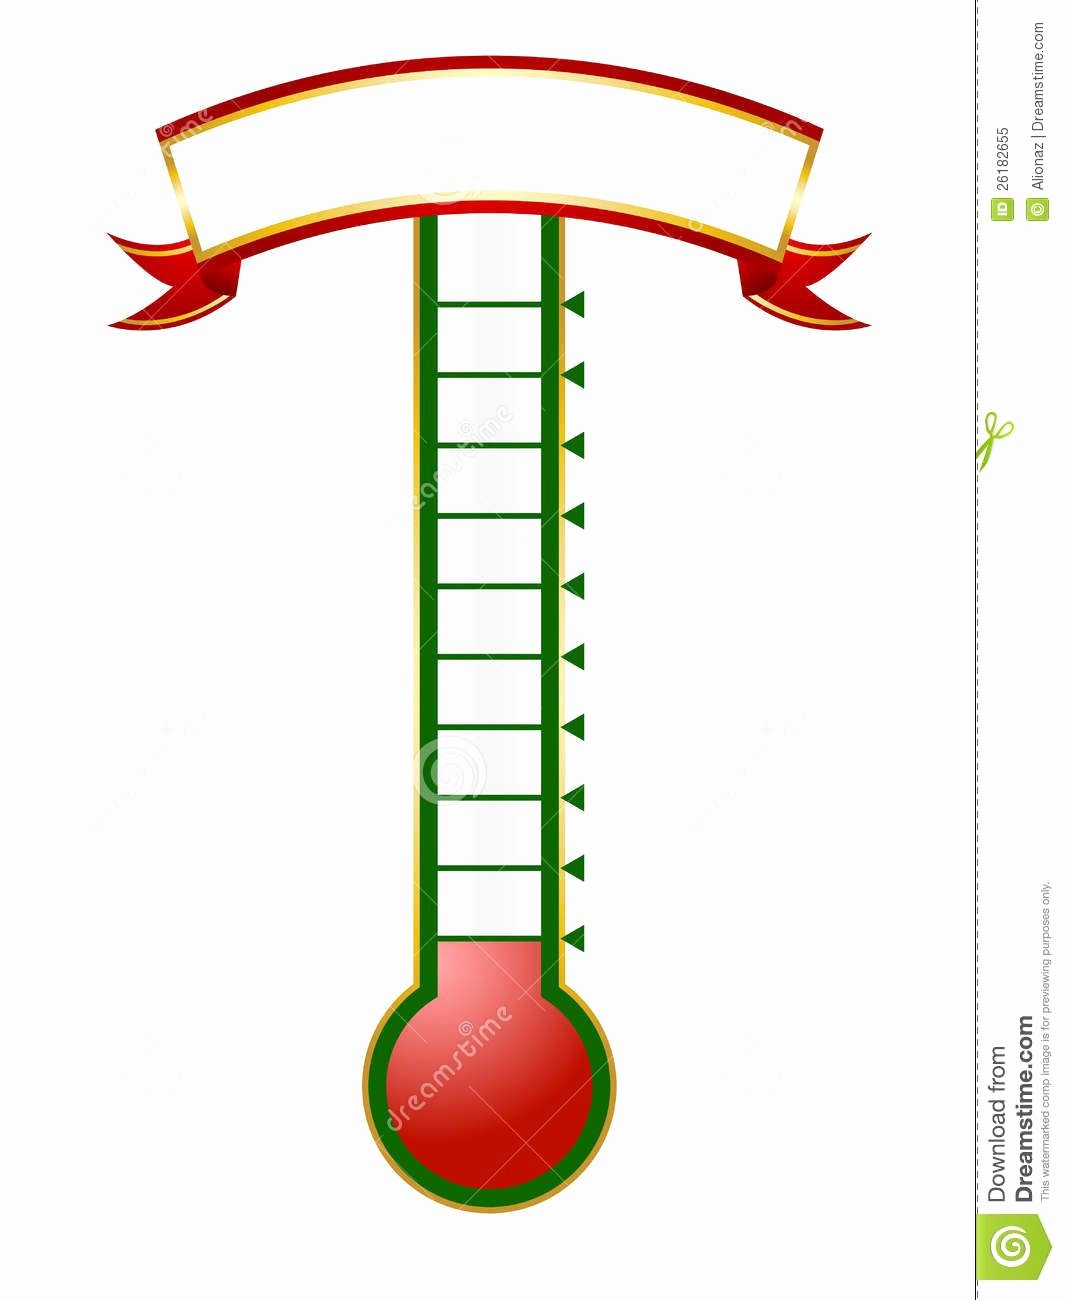 Printable thermometer Goal Awesome thermometer Template